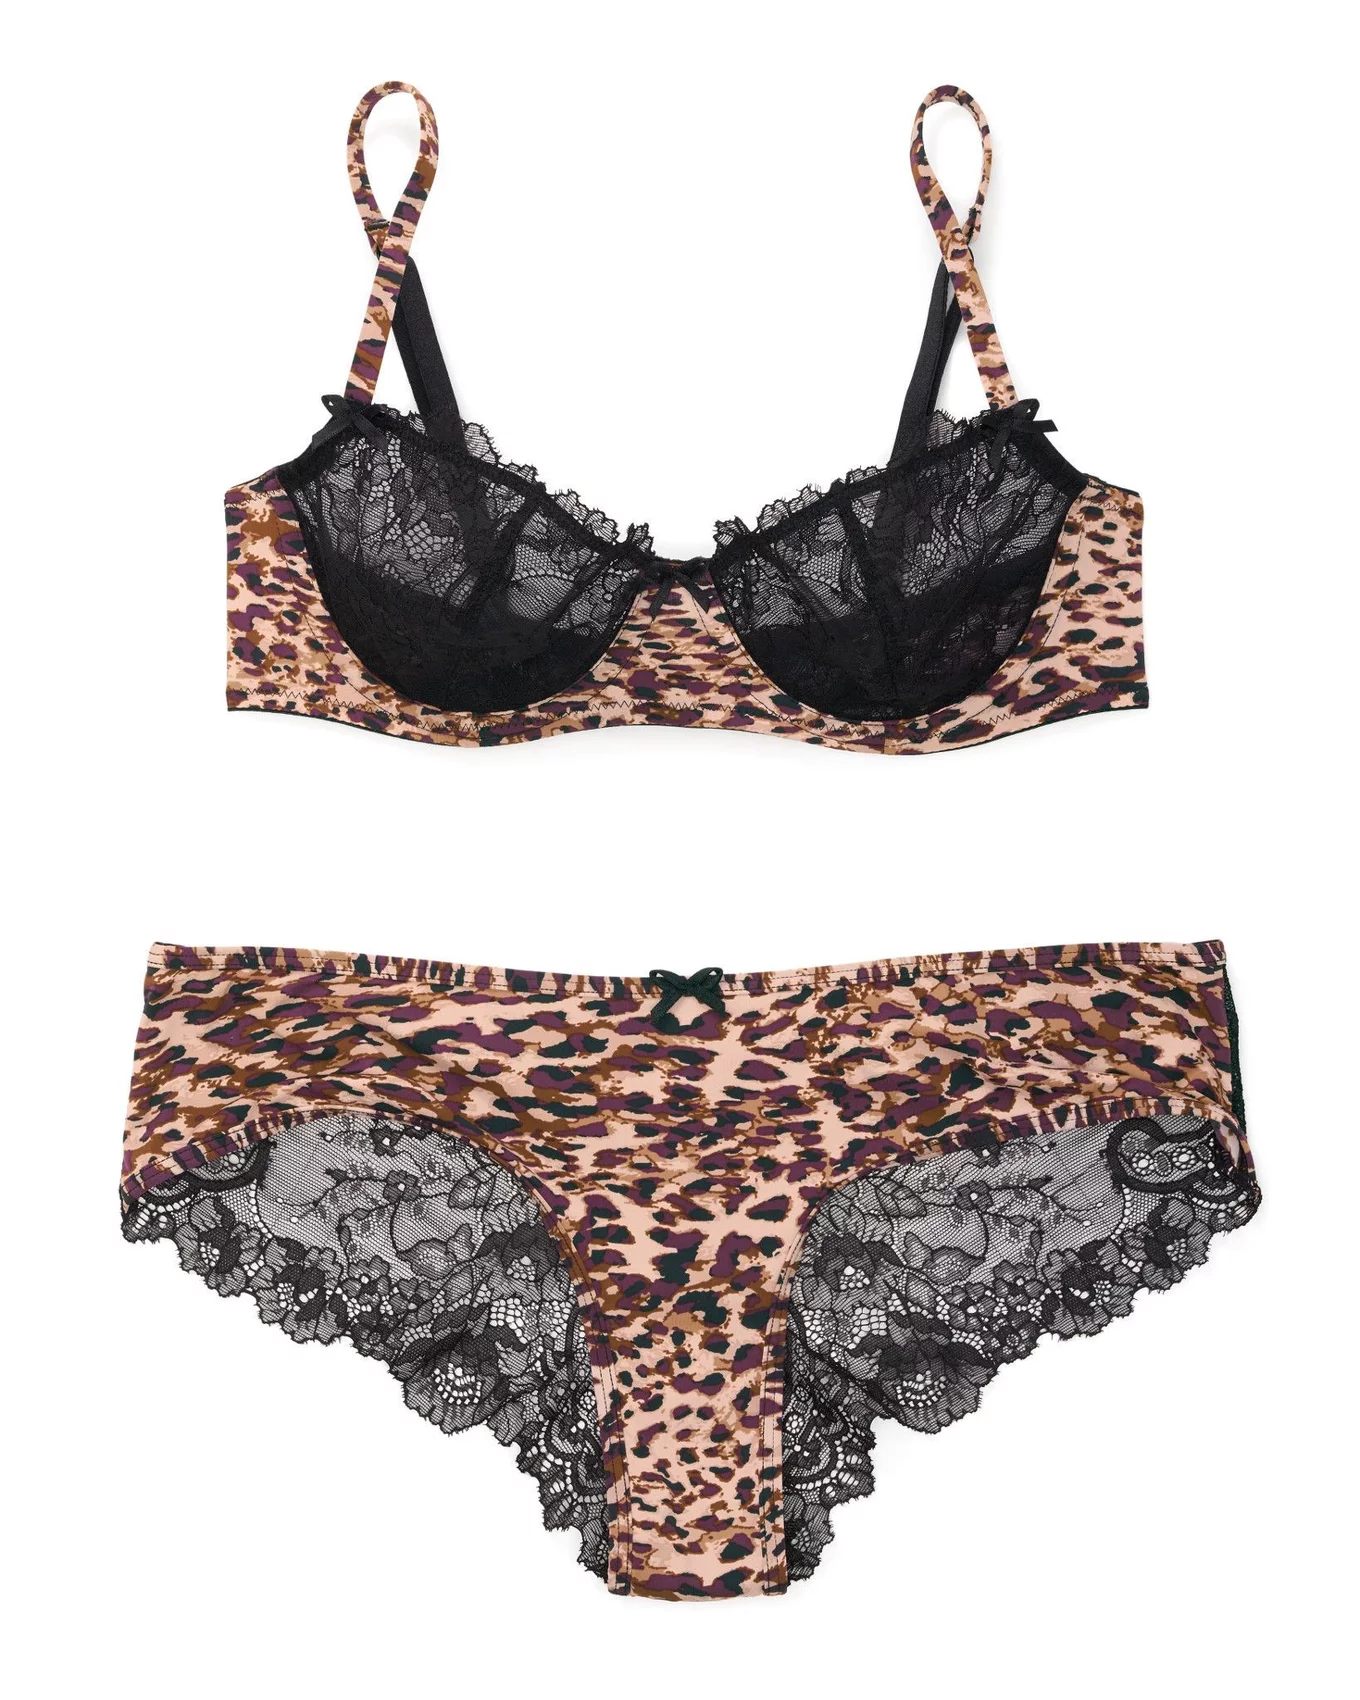 Caen Animal Brown Lace Balconette Unlined Bra And Panty Set | Adore Me